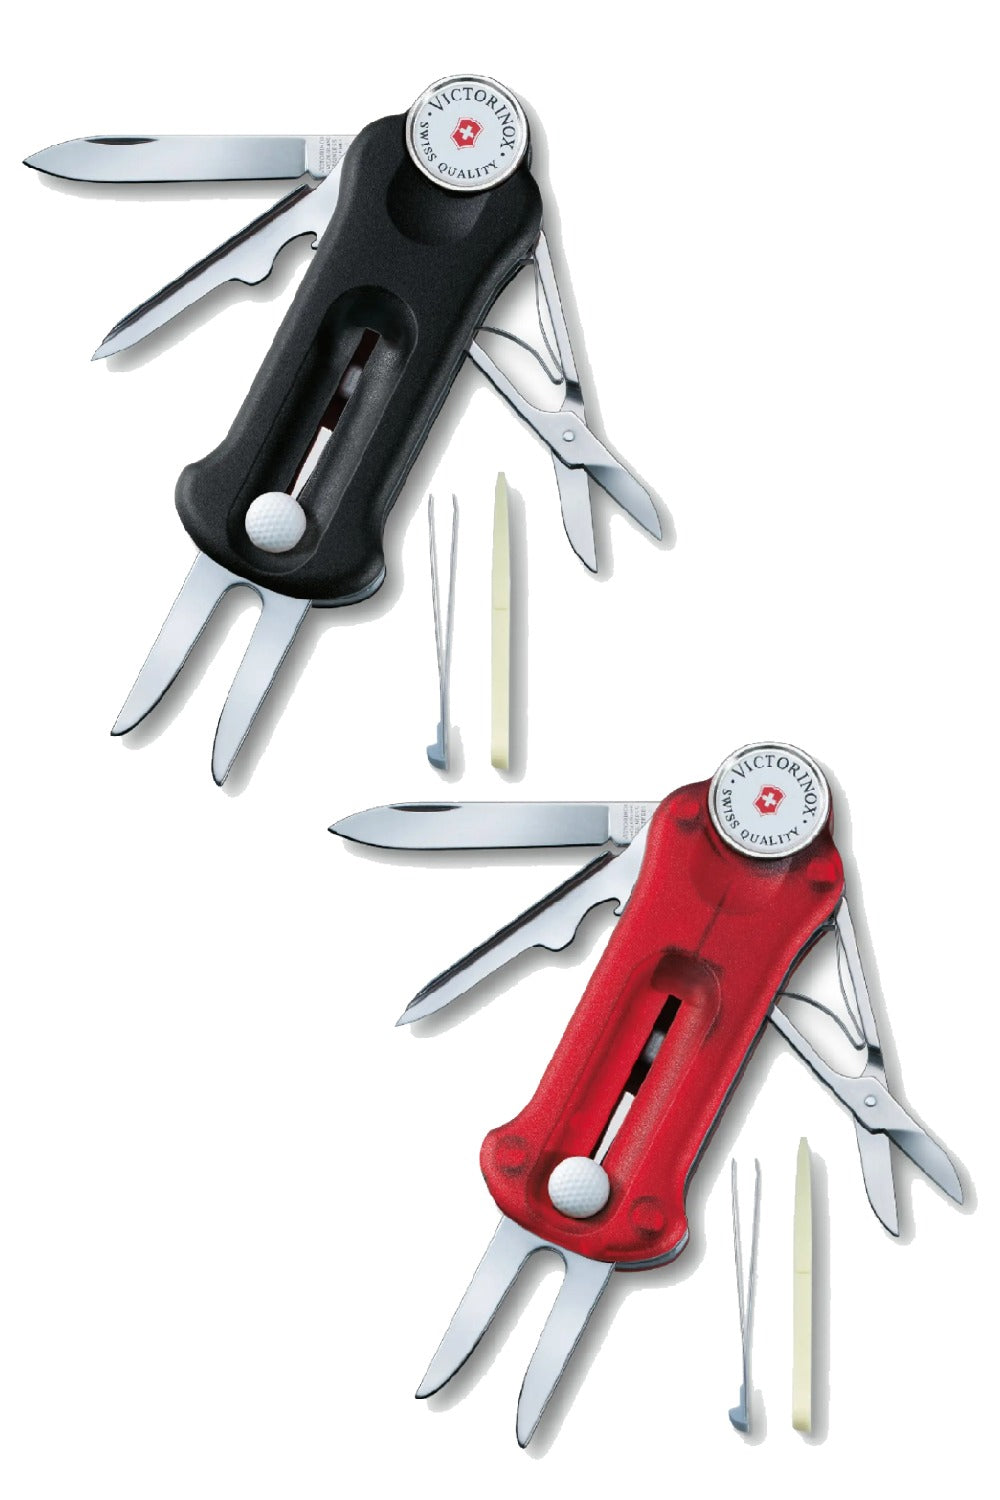 Victorinox Golf Tool Swiss Army Knife in Black, Red Transparent